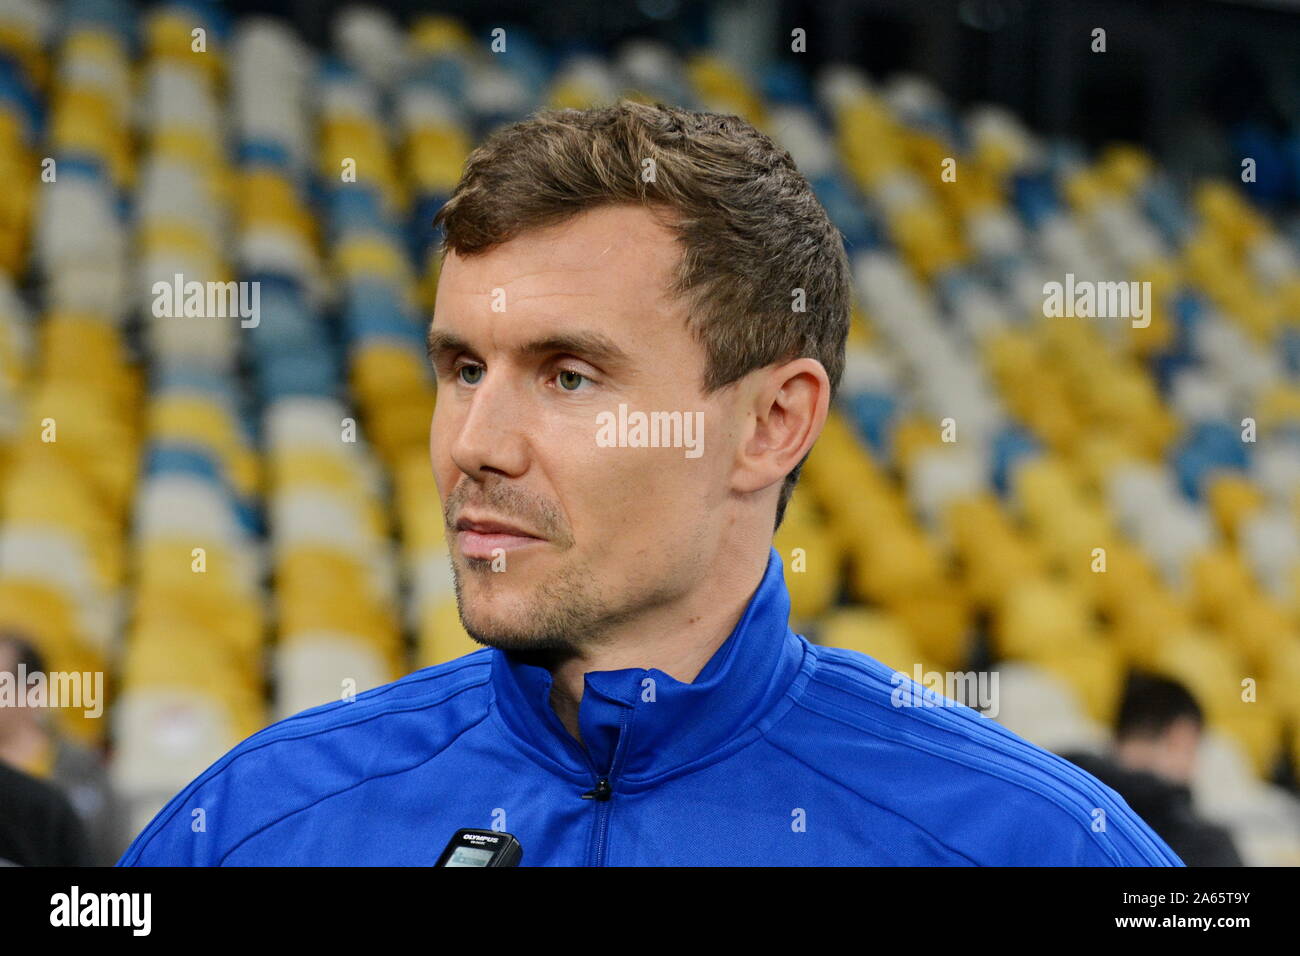 Kiev, Ukraine. 23rd Oct, 2019. KYIV, UKRAINE - OCTOBER 23, 2019: Andreas Bjelland player F.C. Copenhagen speaks during a press conference before FC Dynamo with F.C. Copenhagen in the UEFA Europa League at the Olympic stadium (Photo by Aleksandr Gusev/Pacific Press) Credit: Pacific Press Agency/Alamy Live News Stock Photo